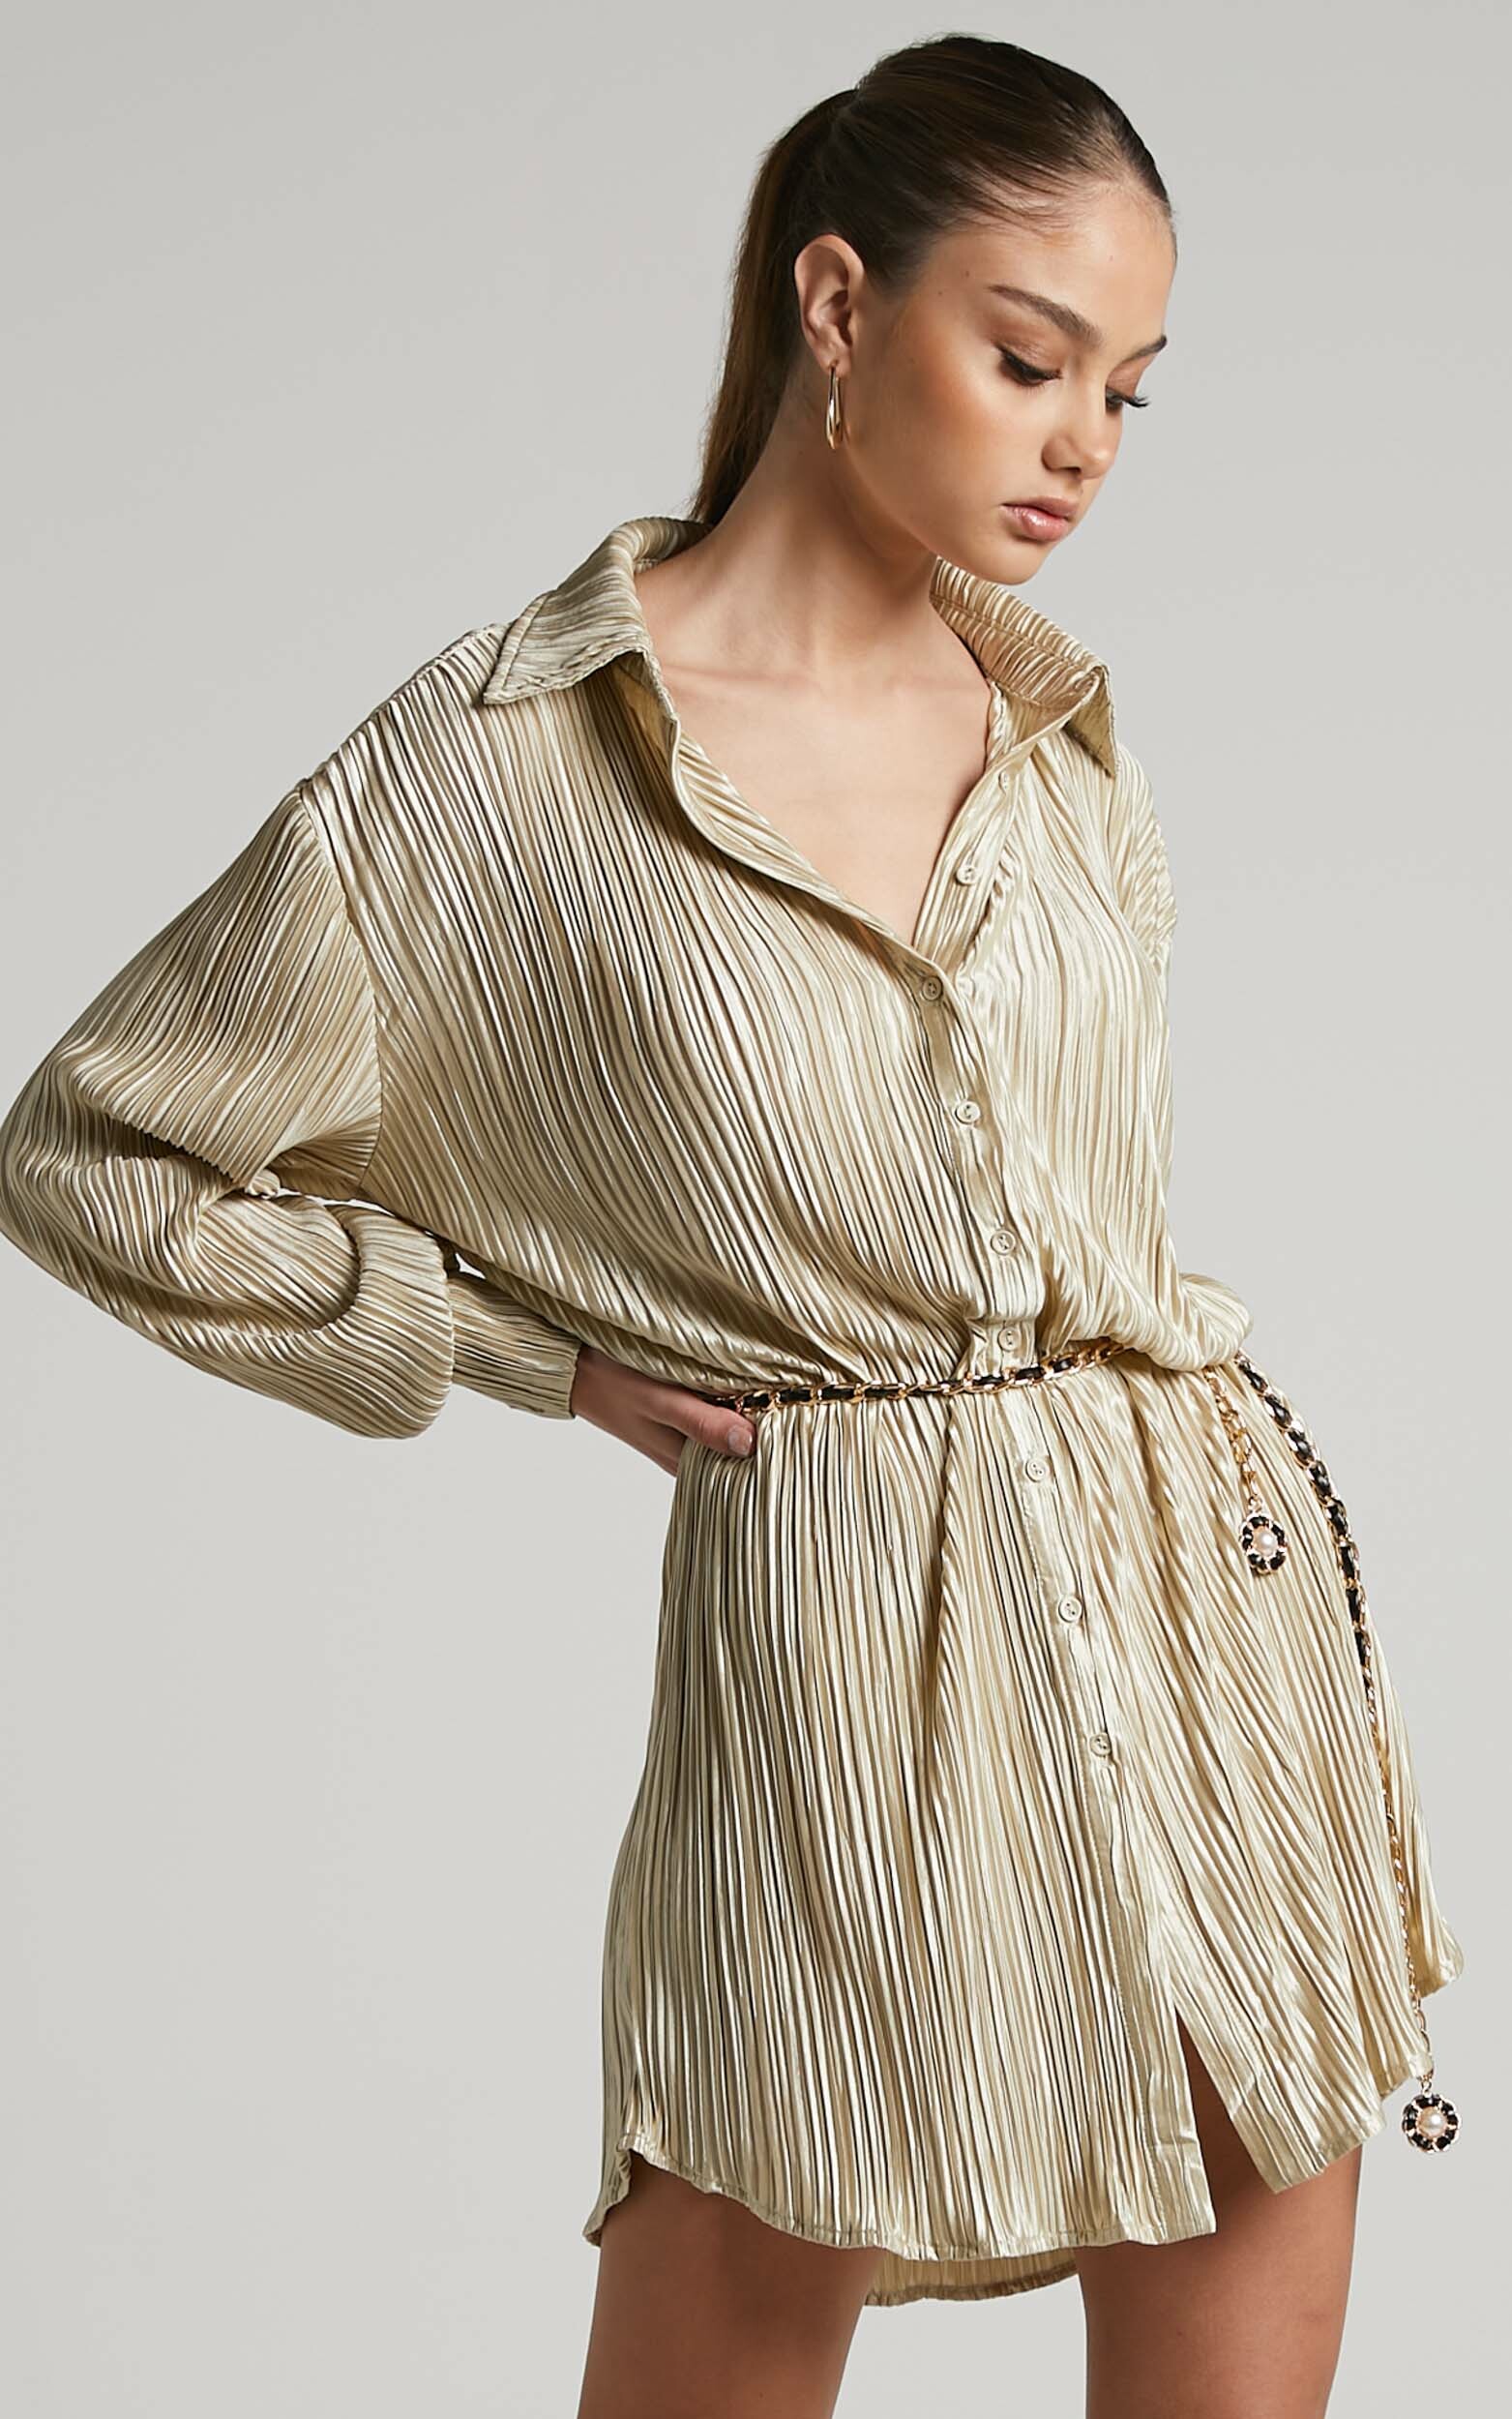 Beca Mini Dress - Crinkle Button Up Shirt Dress in Cream - 04, CRE2, hi-res image number null